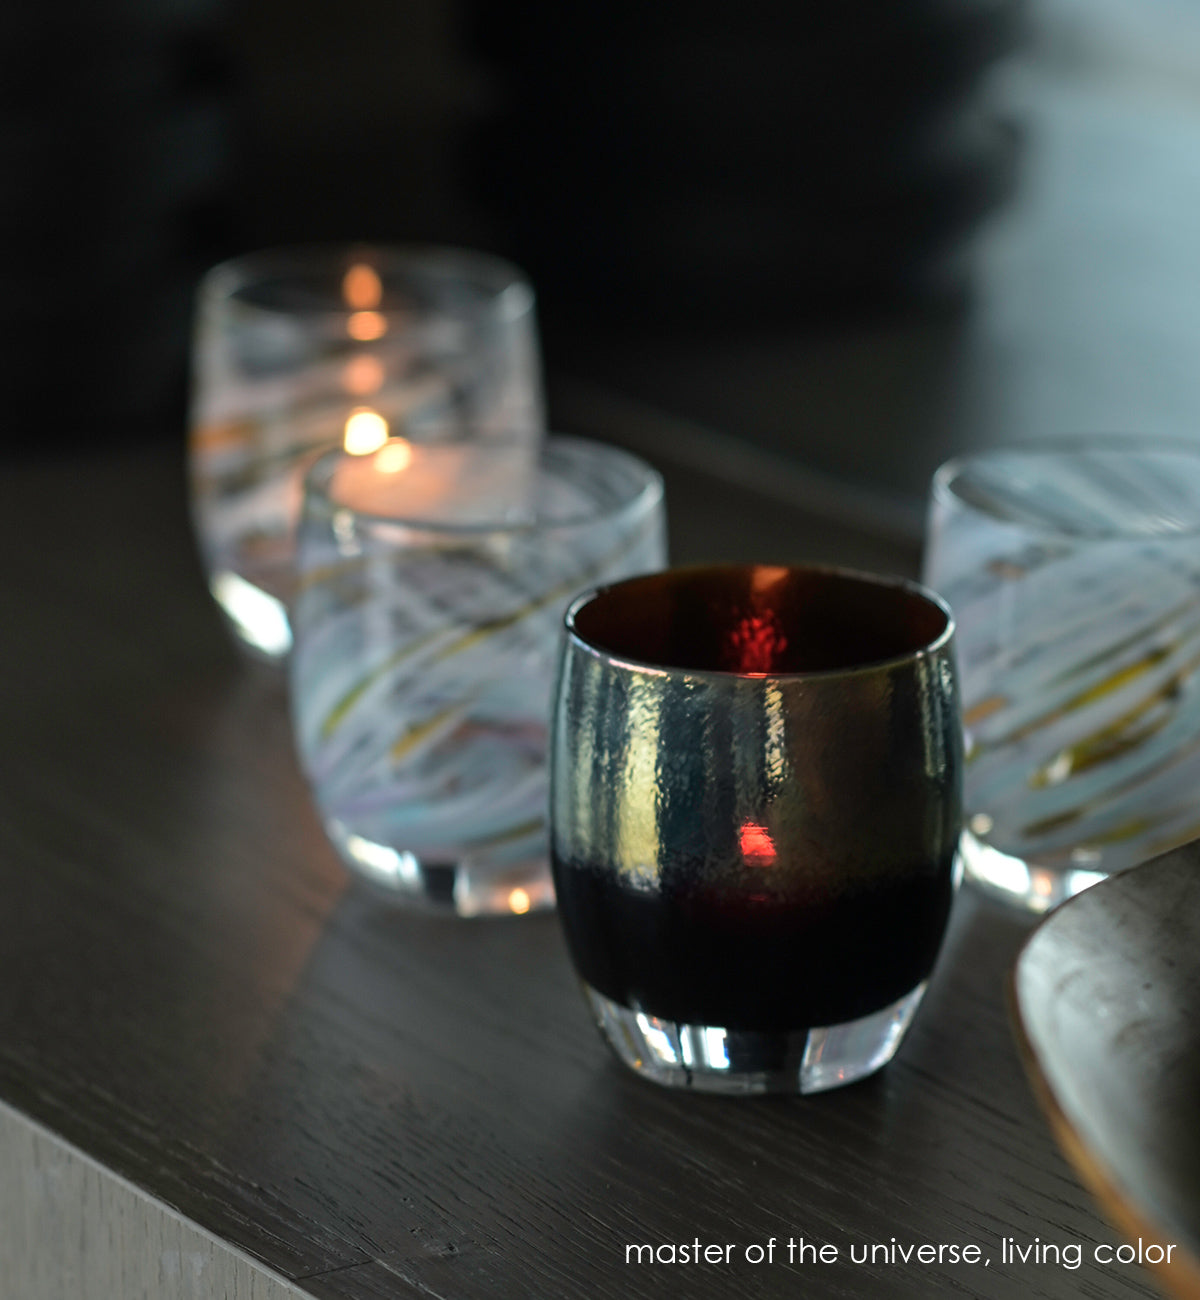 master of the universe silver on brown hand-blown glass votive candle holder. Paired with living color.